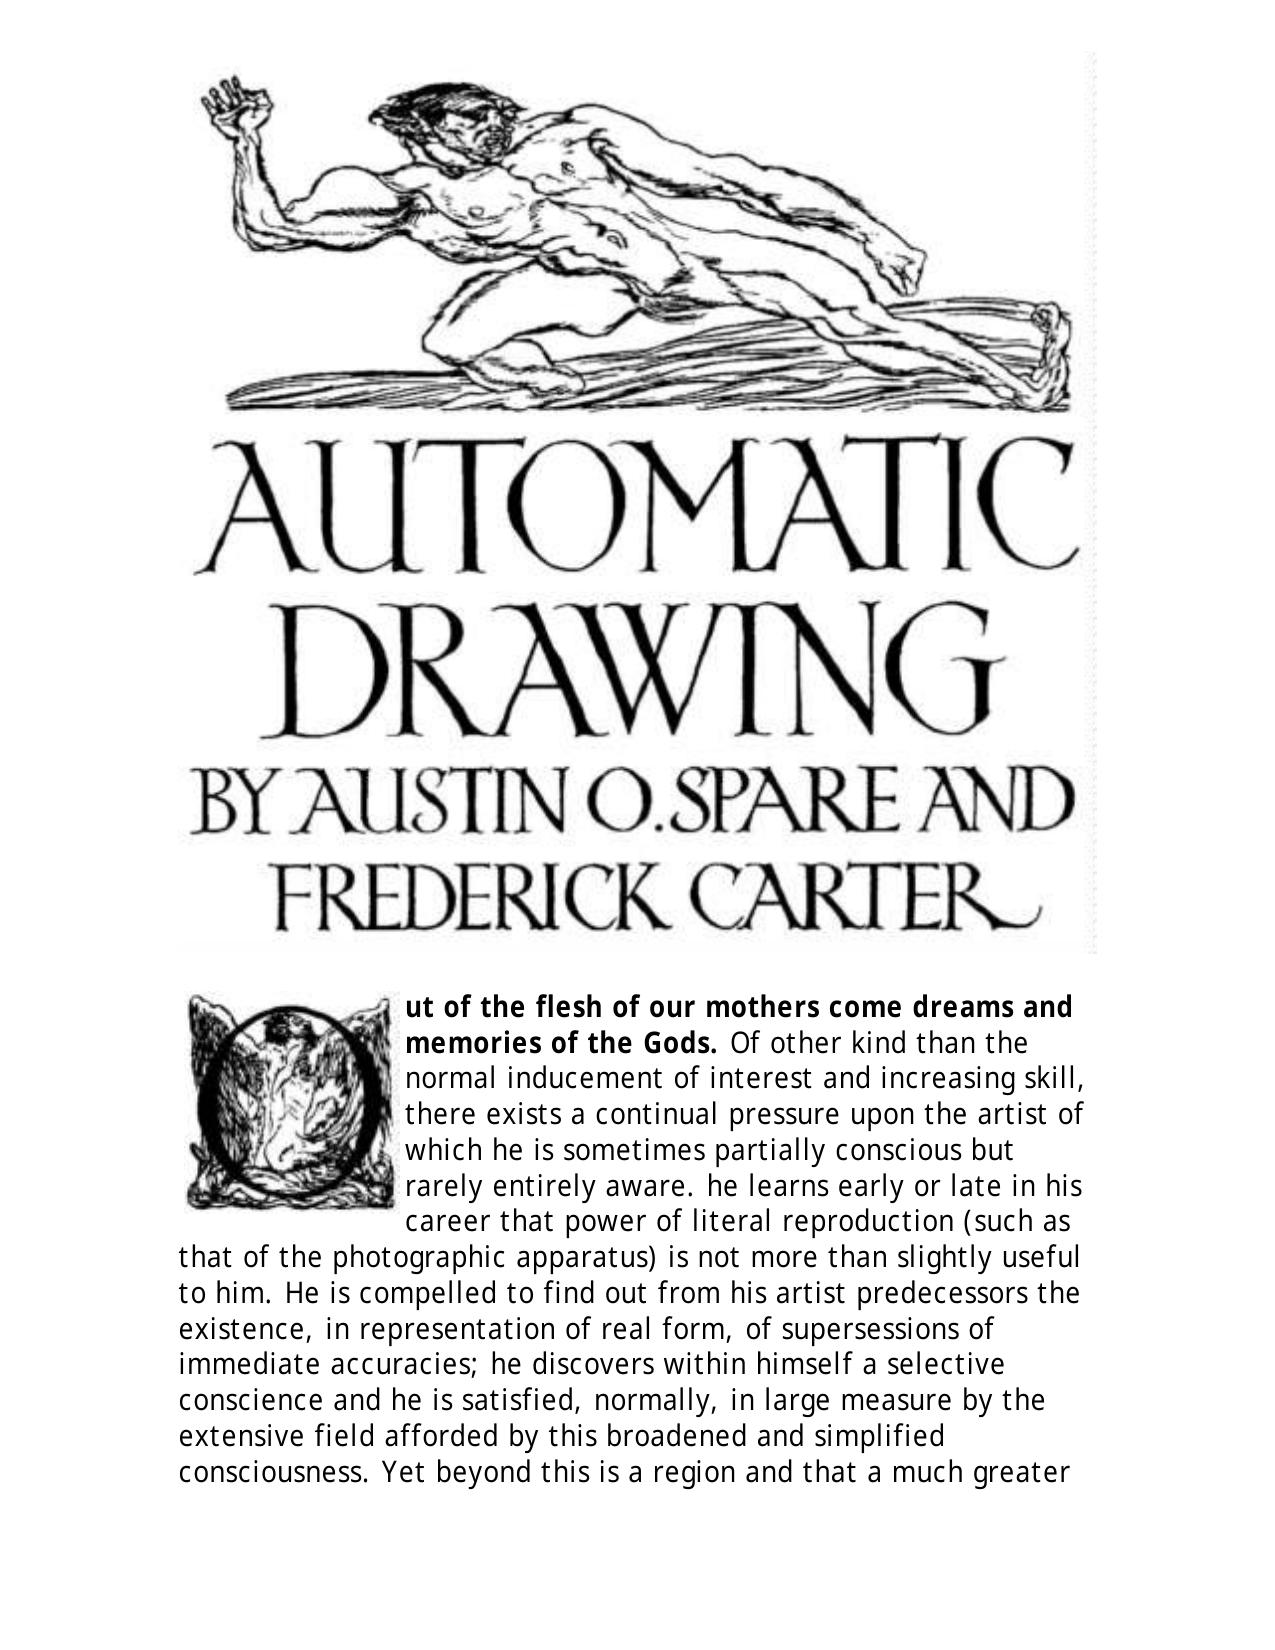 The Book of Automatic Drawing